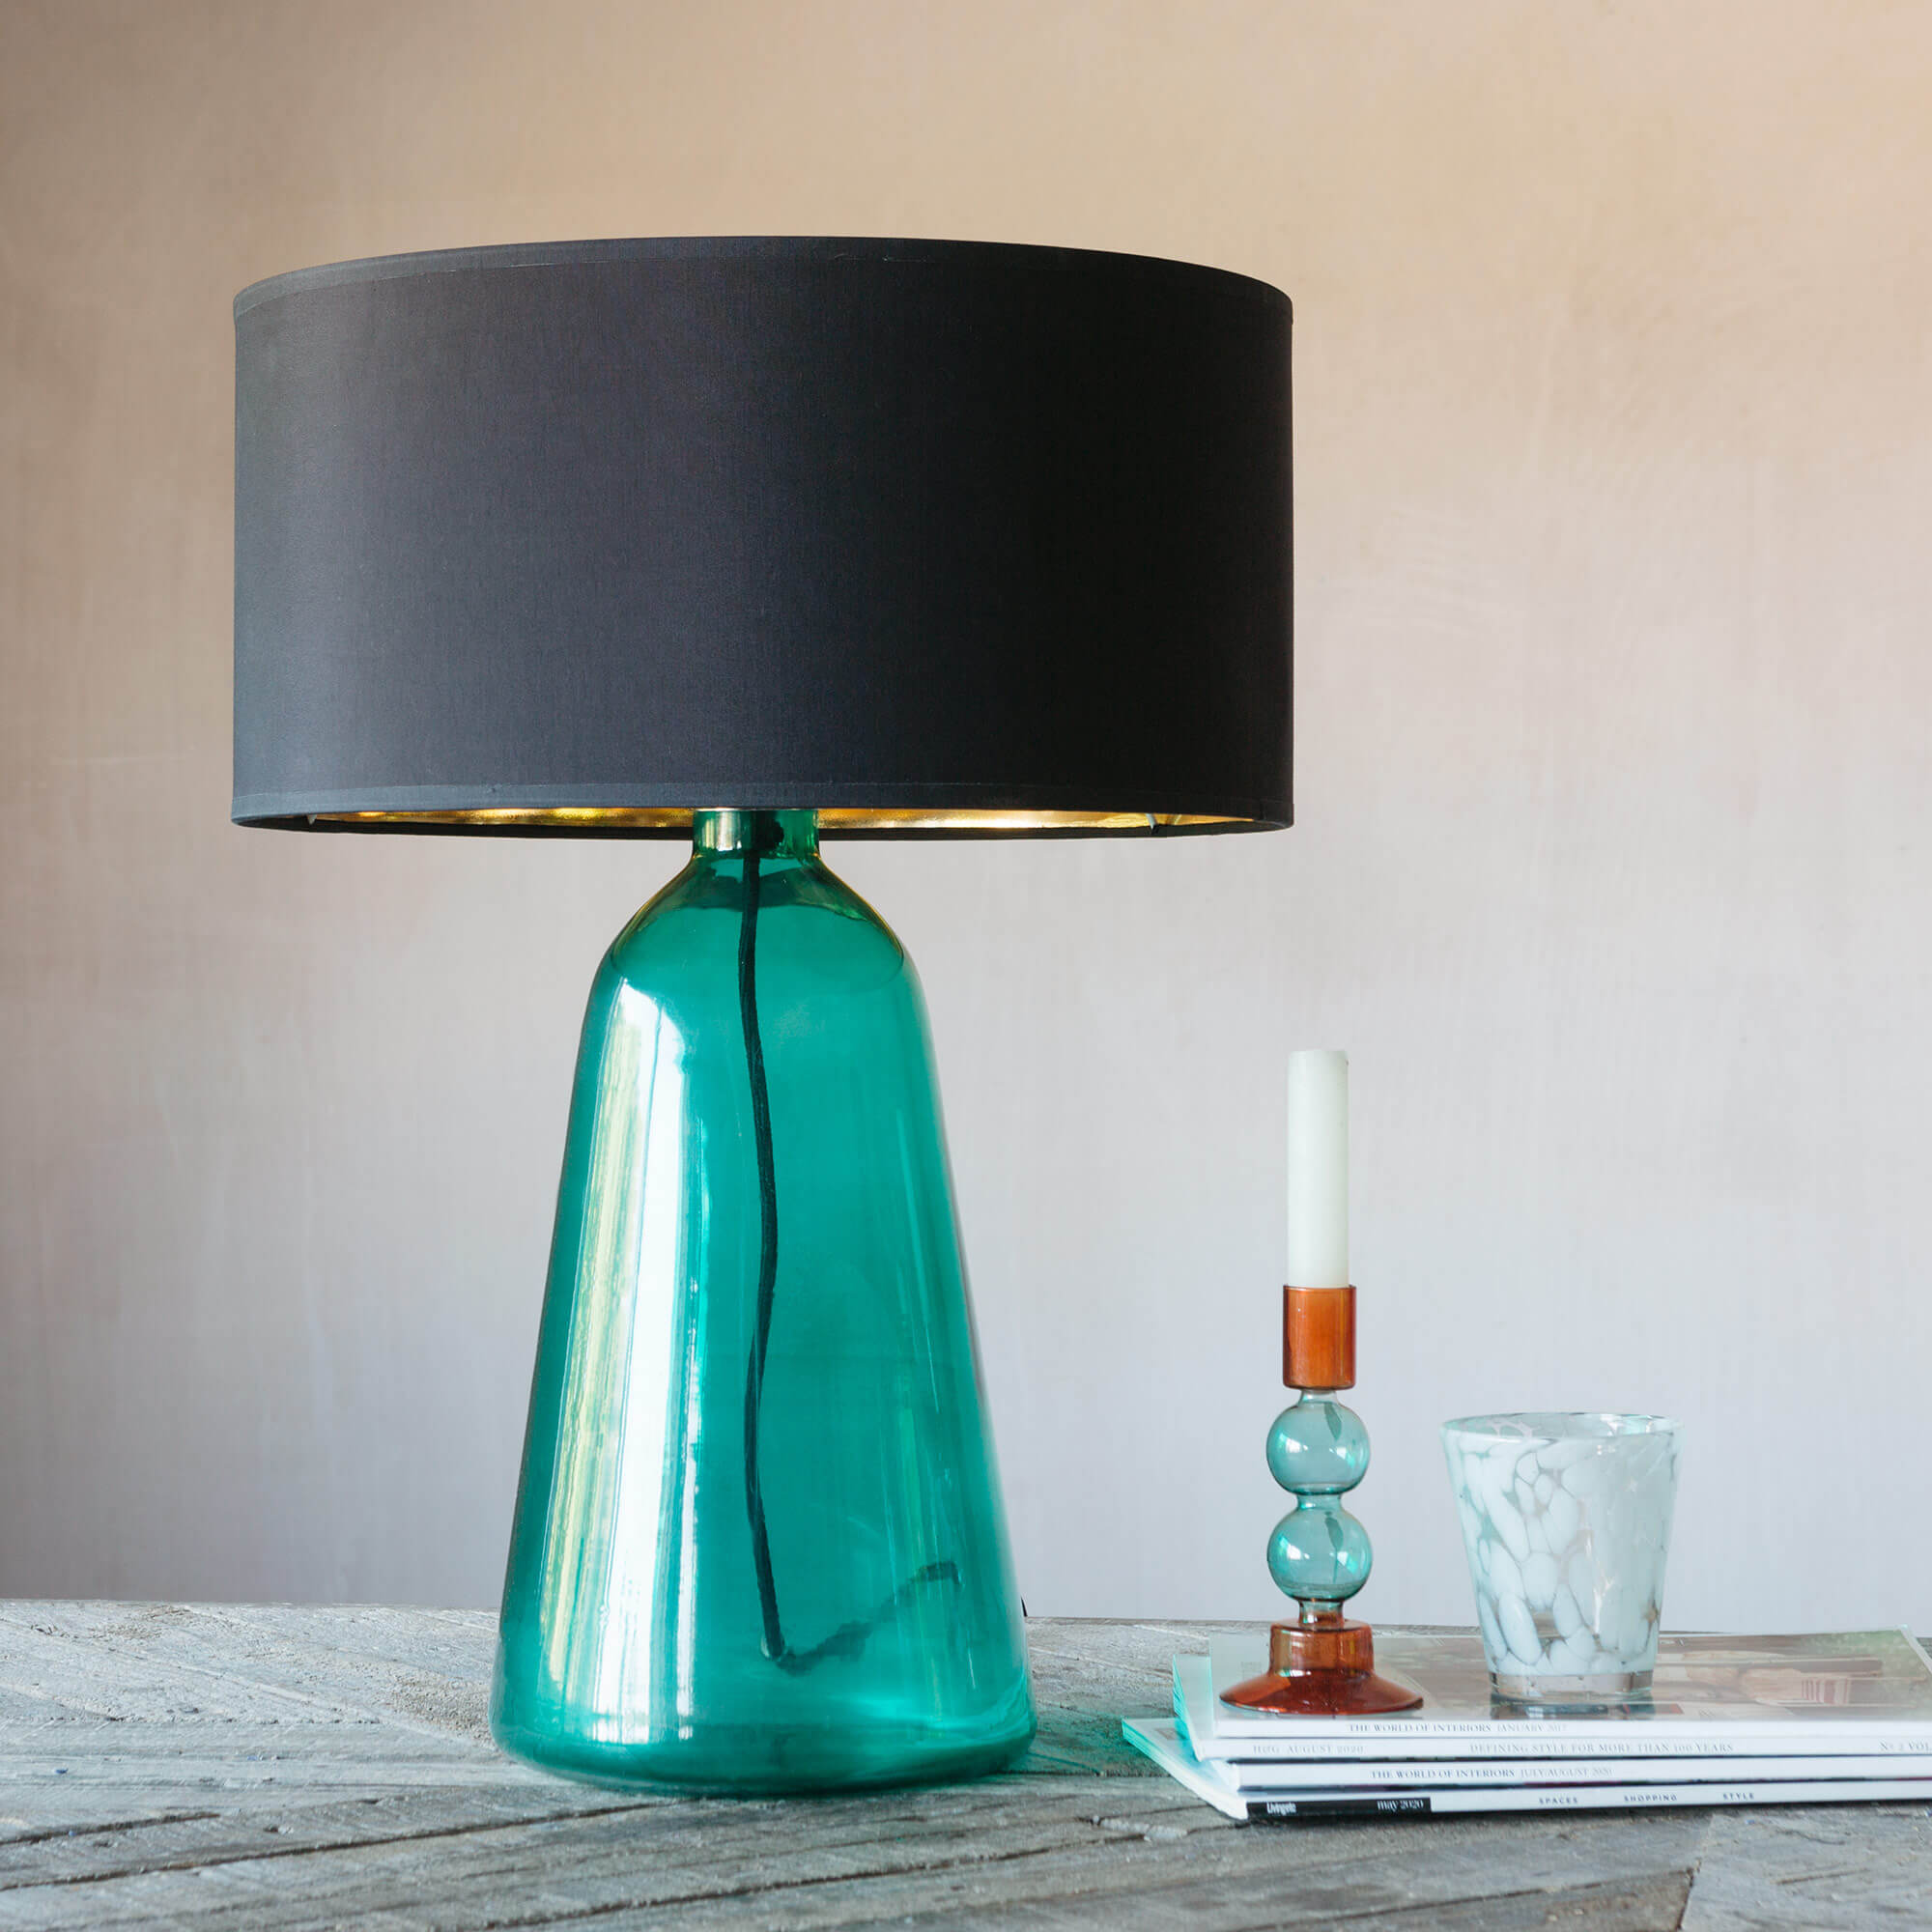 Photo of Graham and green gianni turquoise table lamp